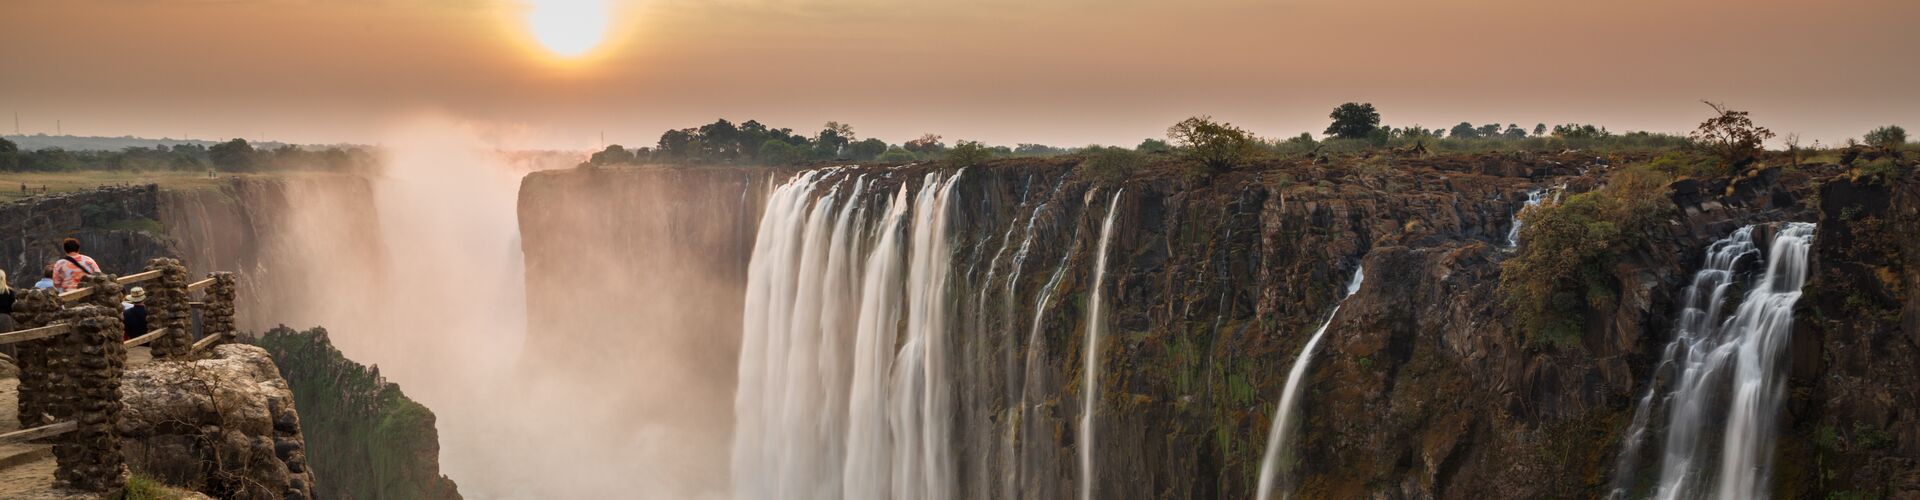 Victoria Falls to Johannesburg Tours with Intrepid Travel